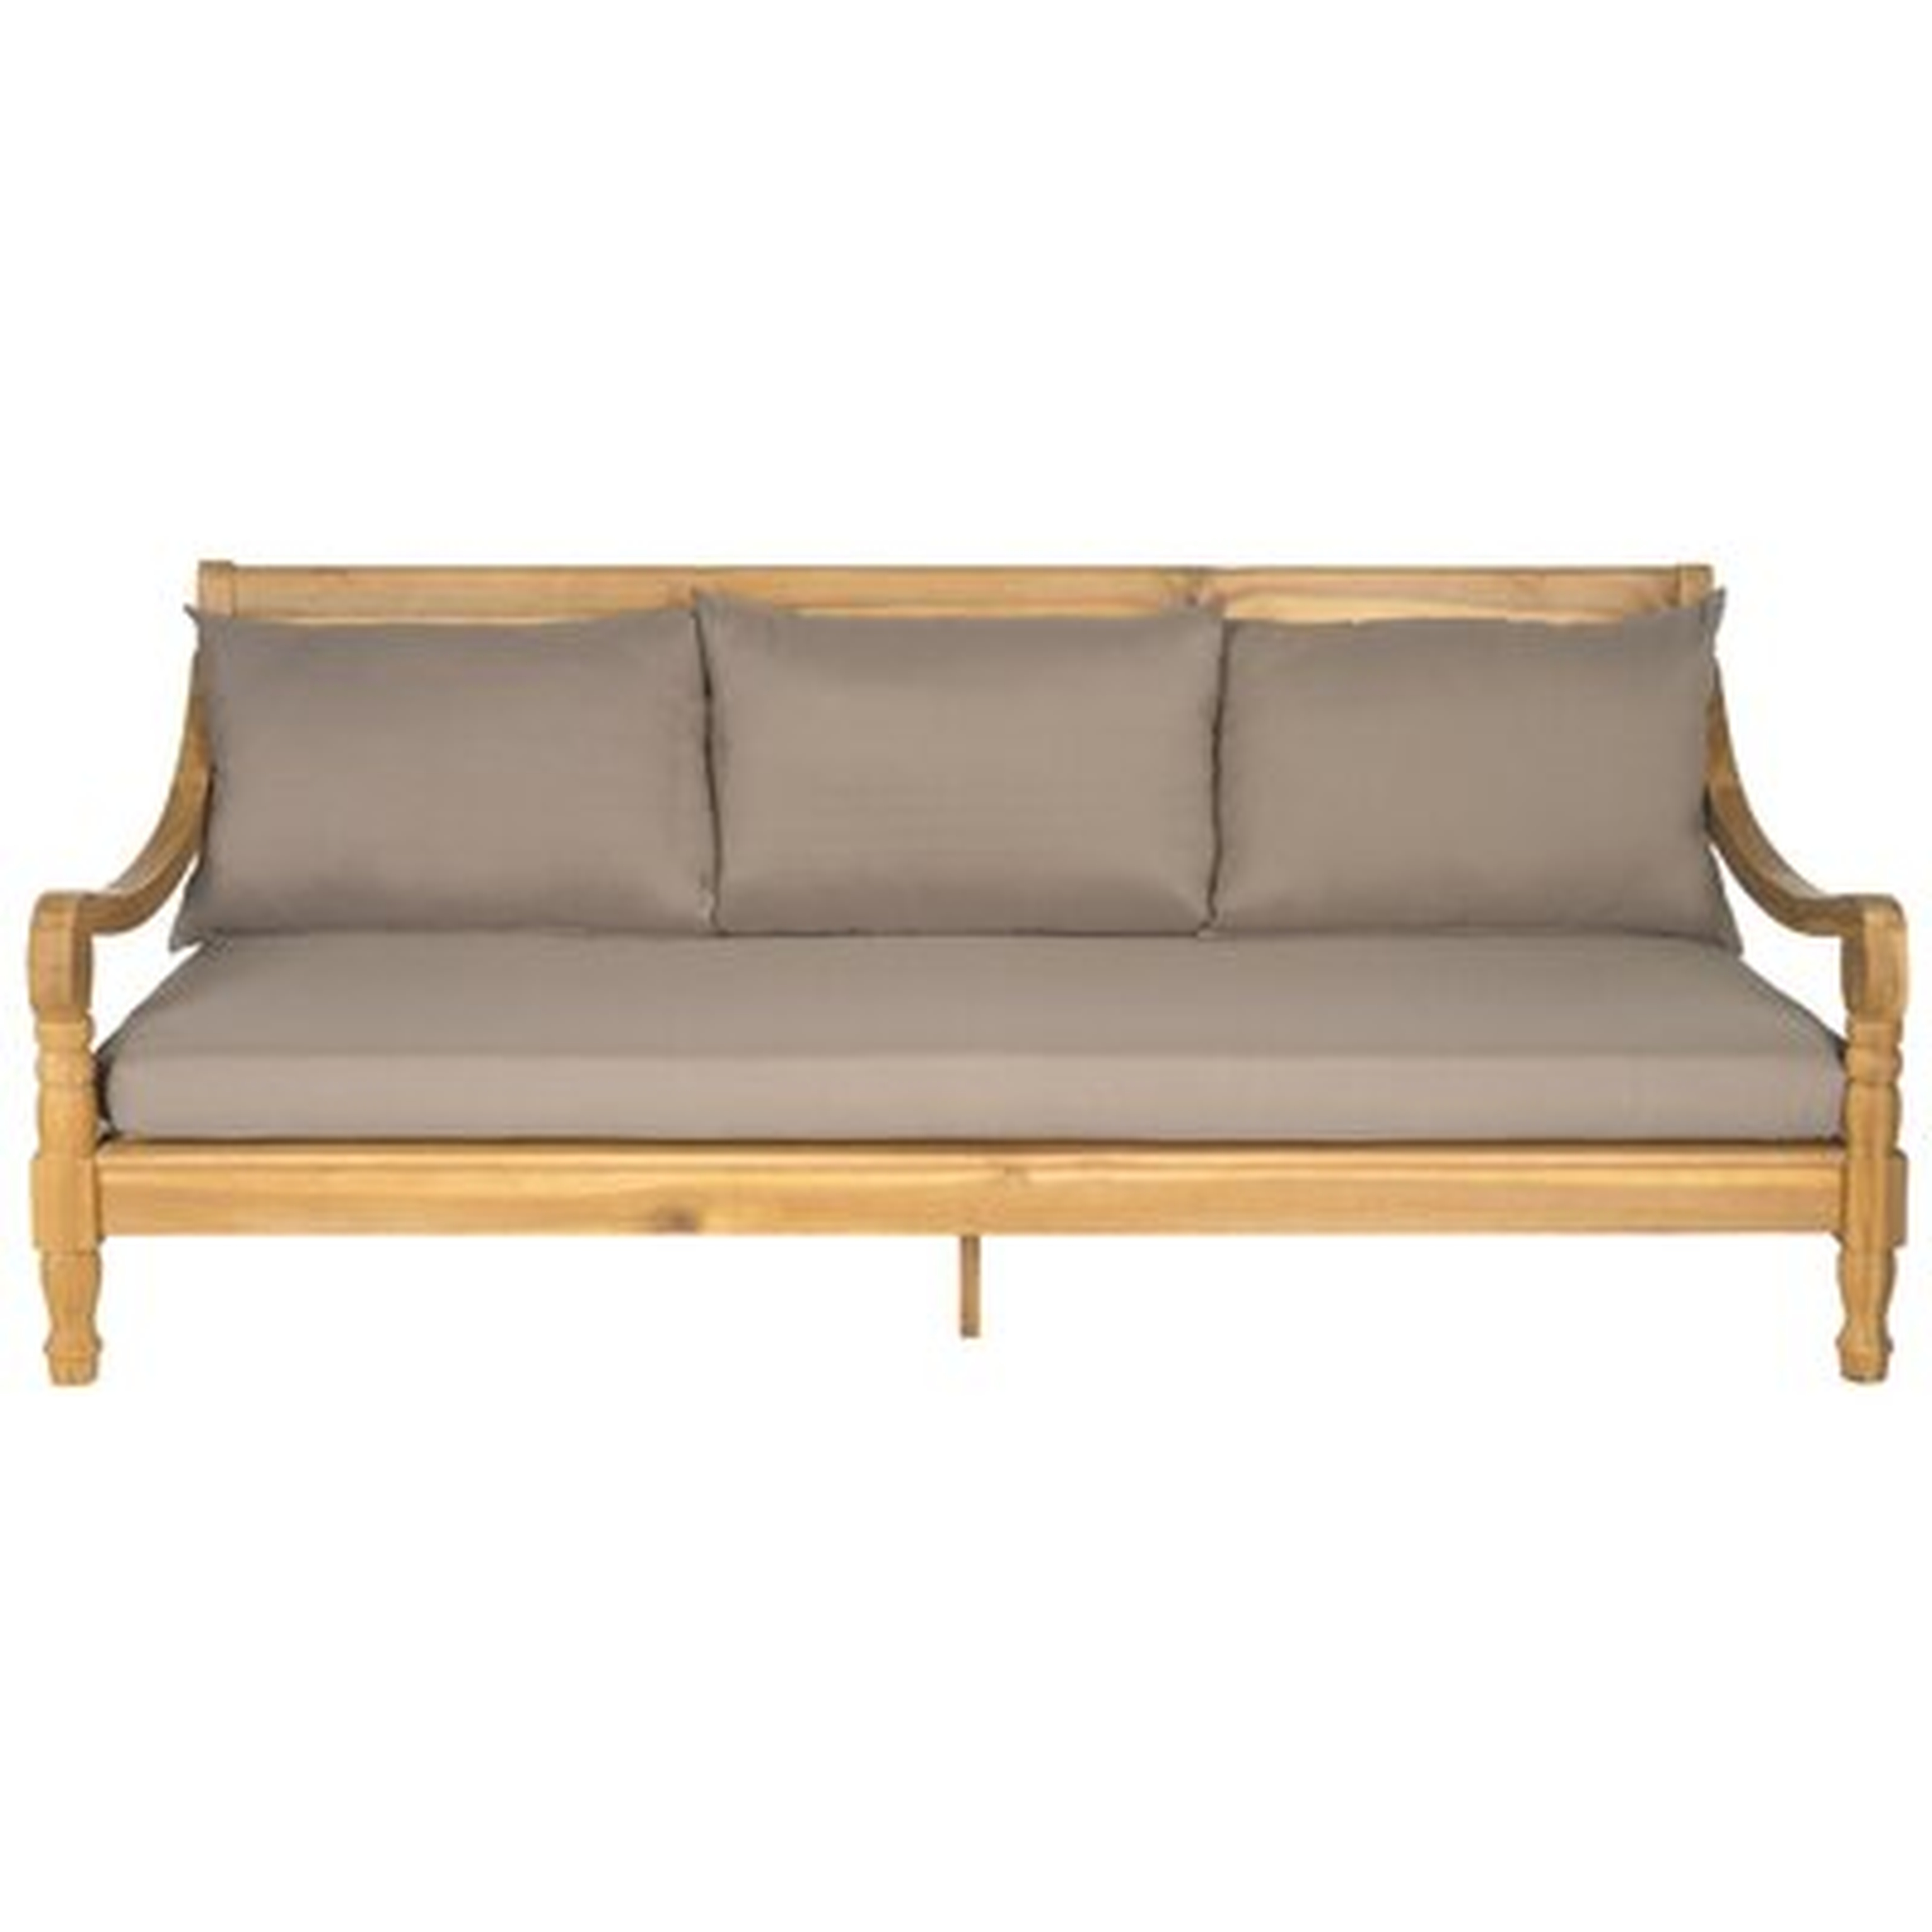 Roush Teak Patio Daybed with Cushions - Wayfair